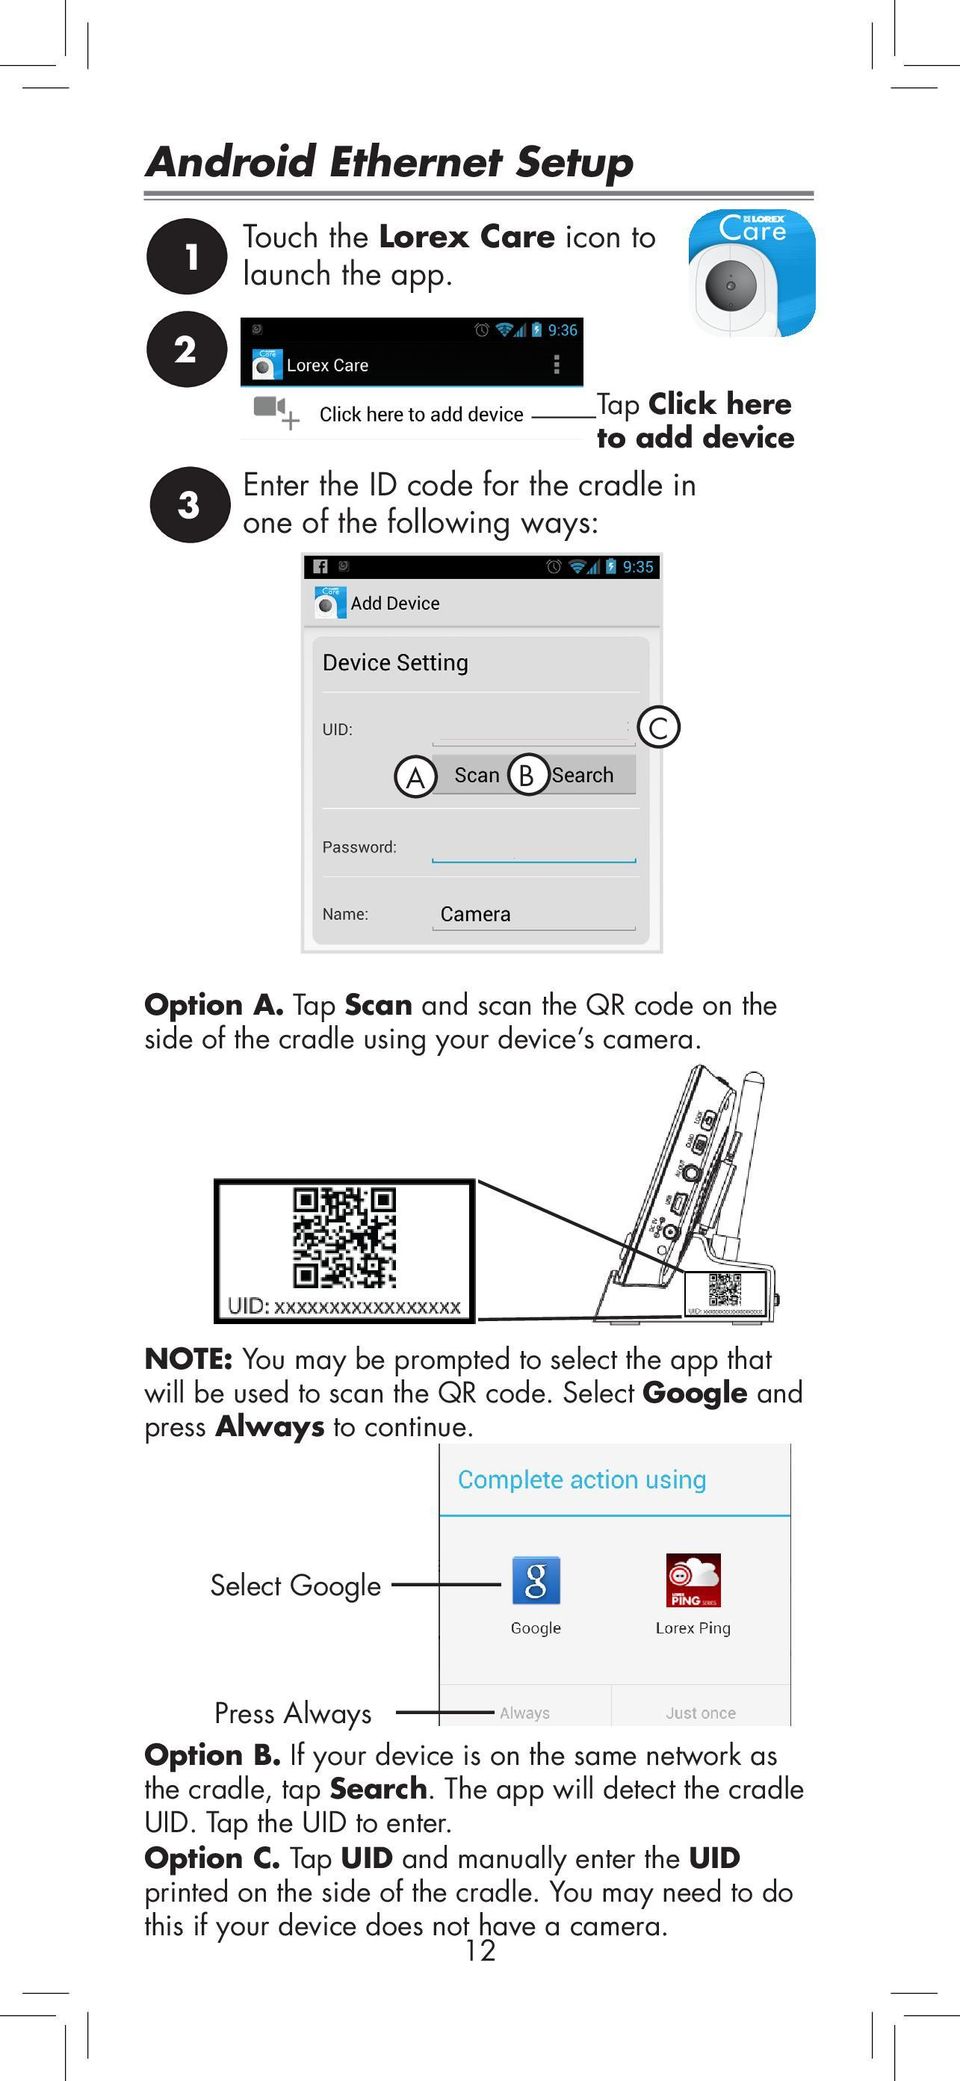 Tap Scan and scan the QR code on the side of the cradle using your device s camera. NOTE: You may be prompted to select the app that will be used to scan the QR code.